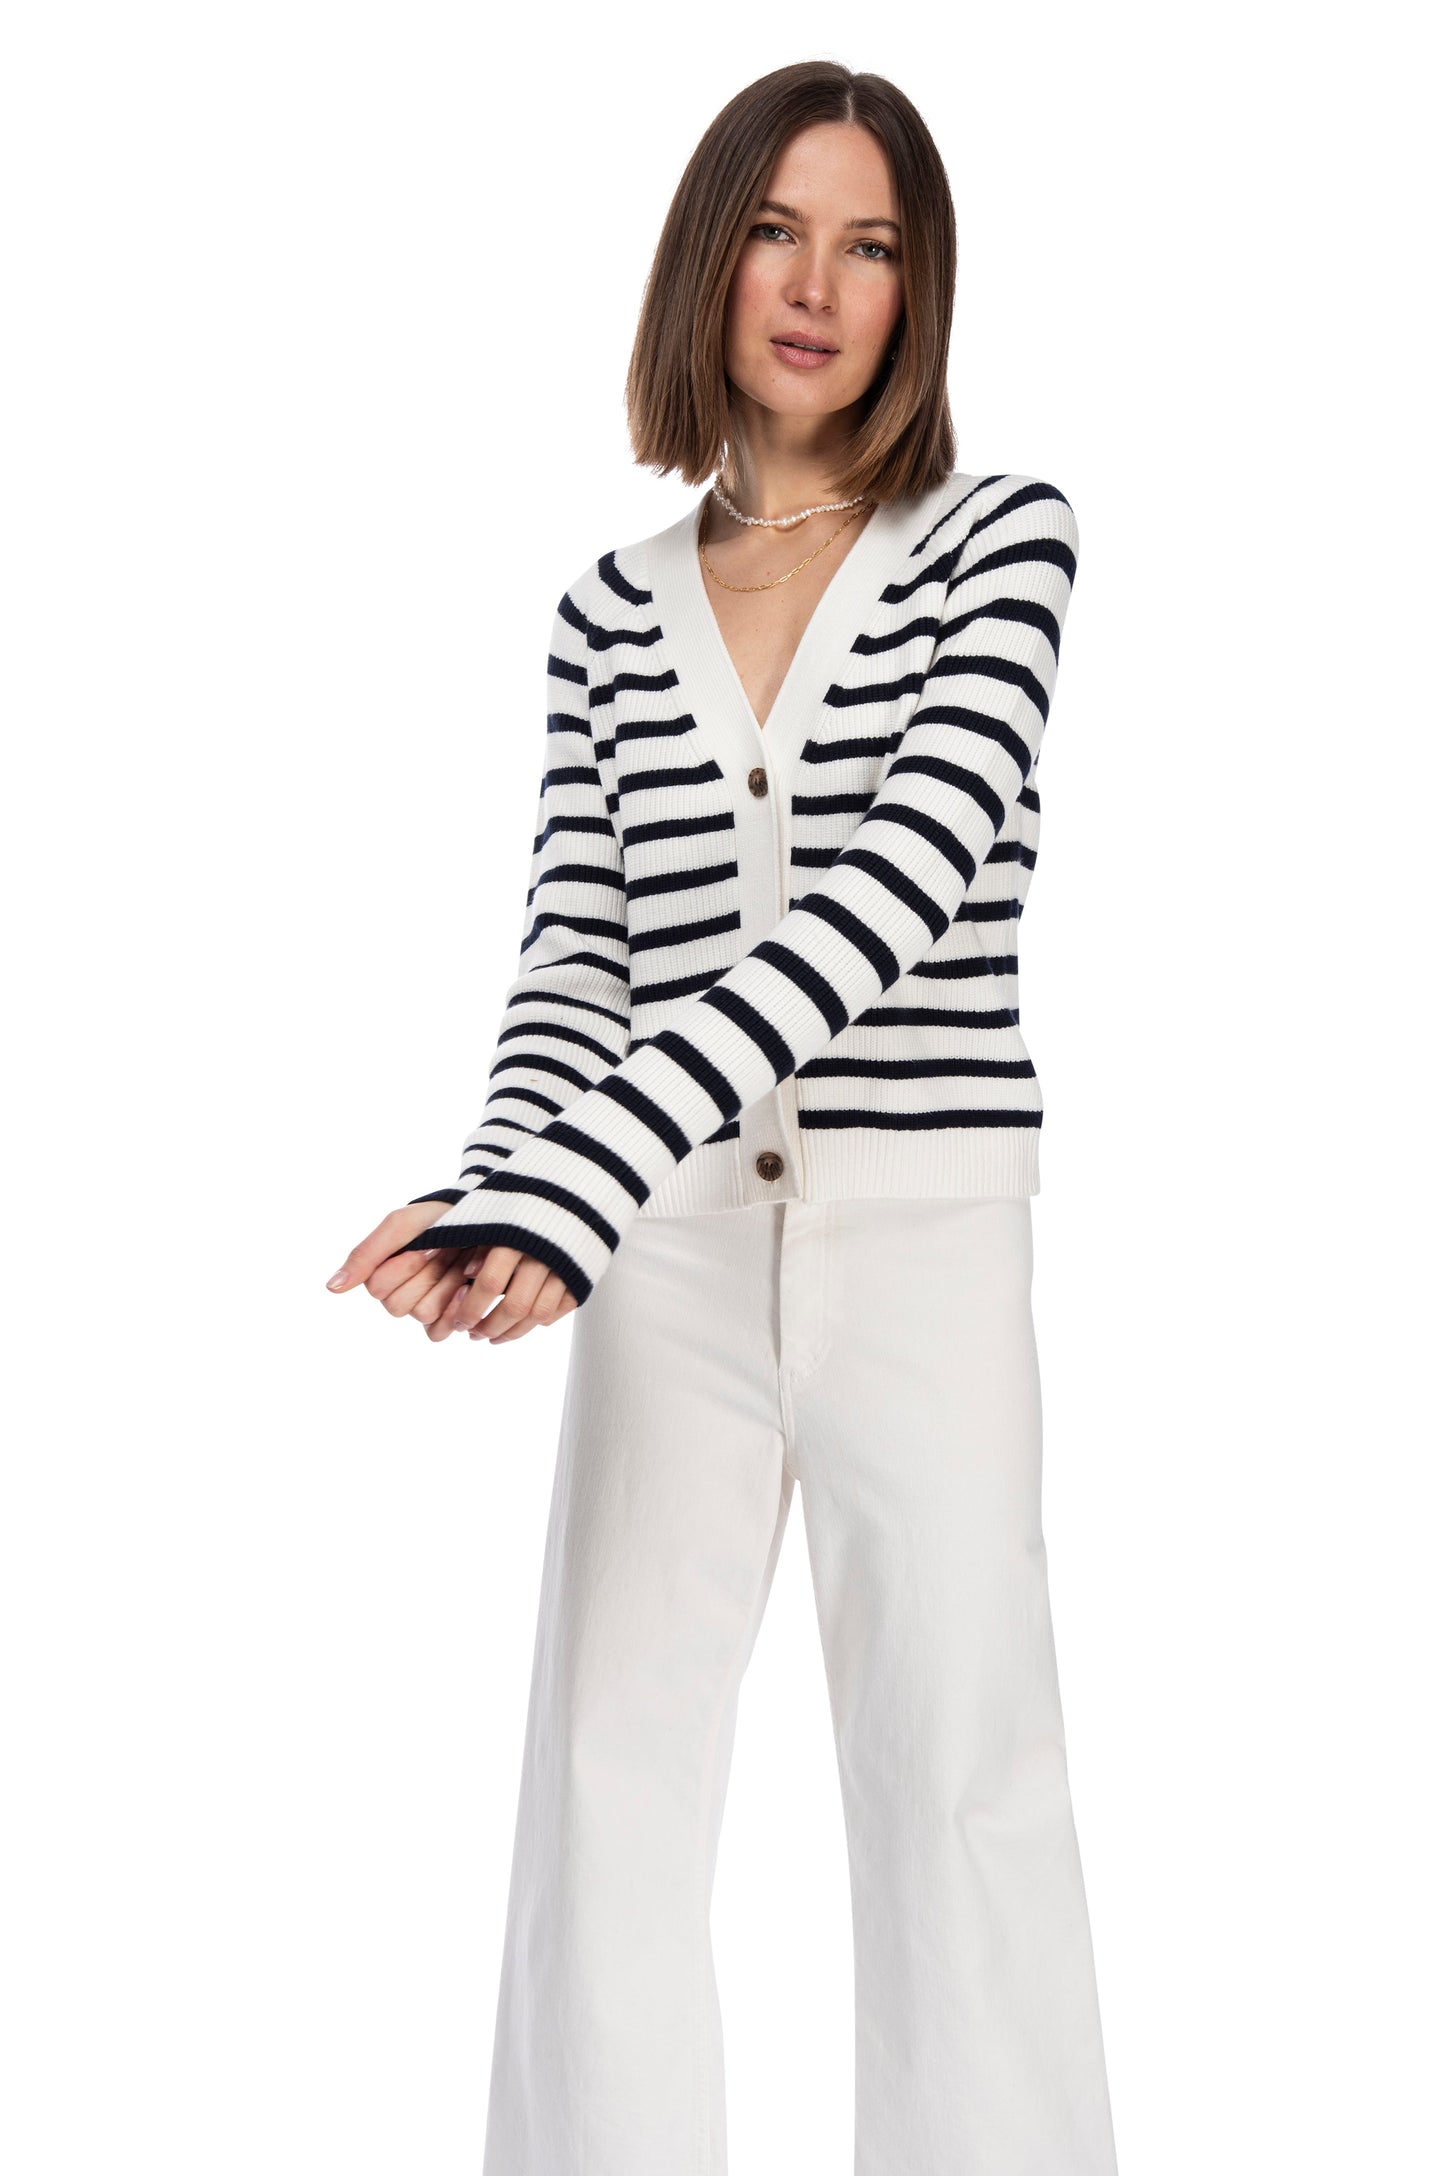 A woman stands on a white background, dressed in a chic black and white LS Stripe Cardigan crafted from super soft yarn by B Collection by Bobeau, paired with white pants, presenting a relaxed yet fashionable look.